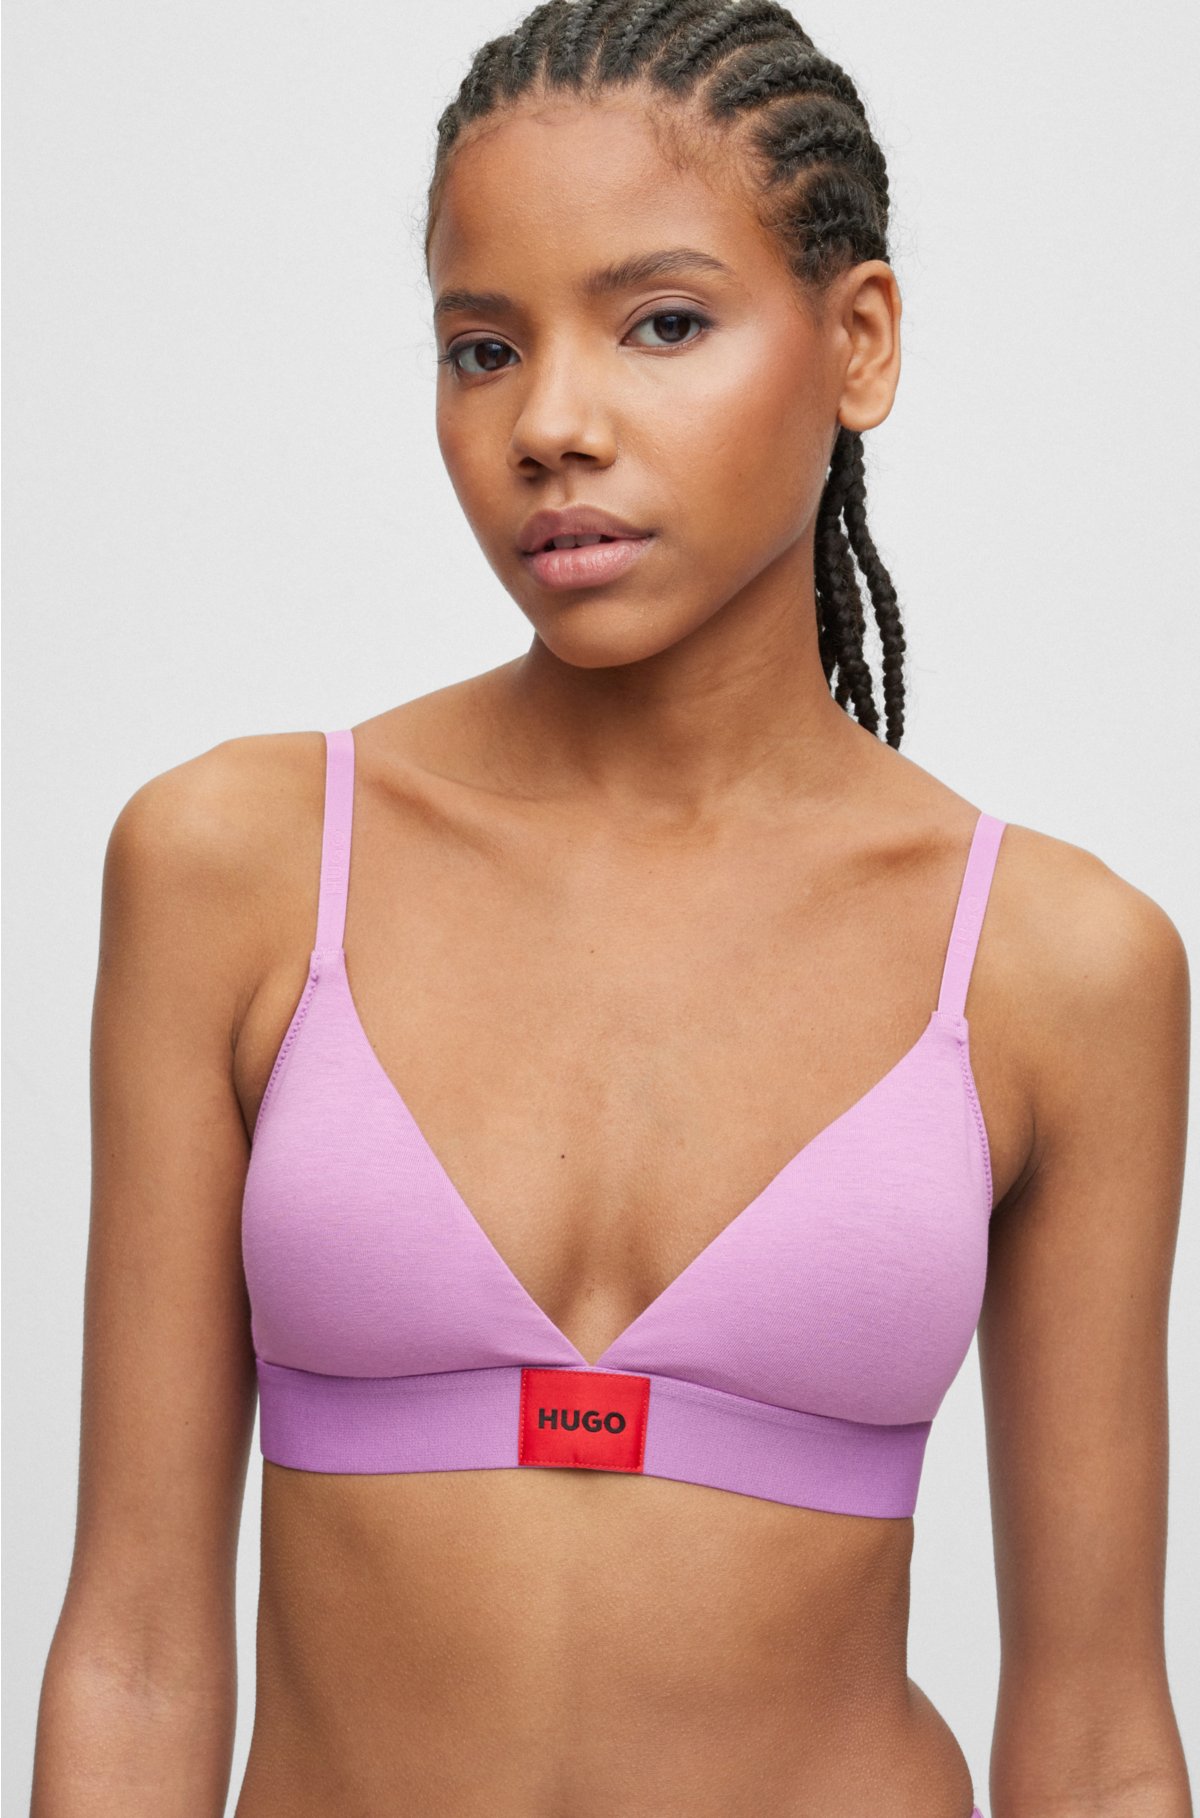 HUGO - Spaghetti-strap top with logo lettering and side zip